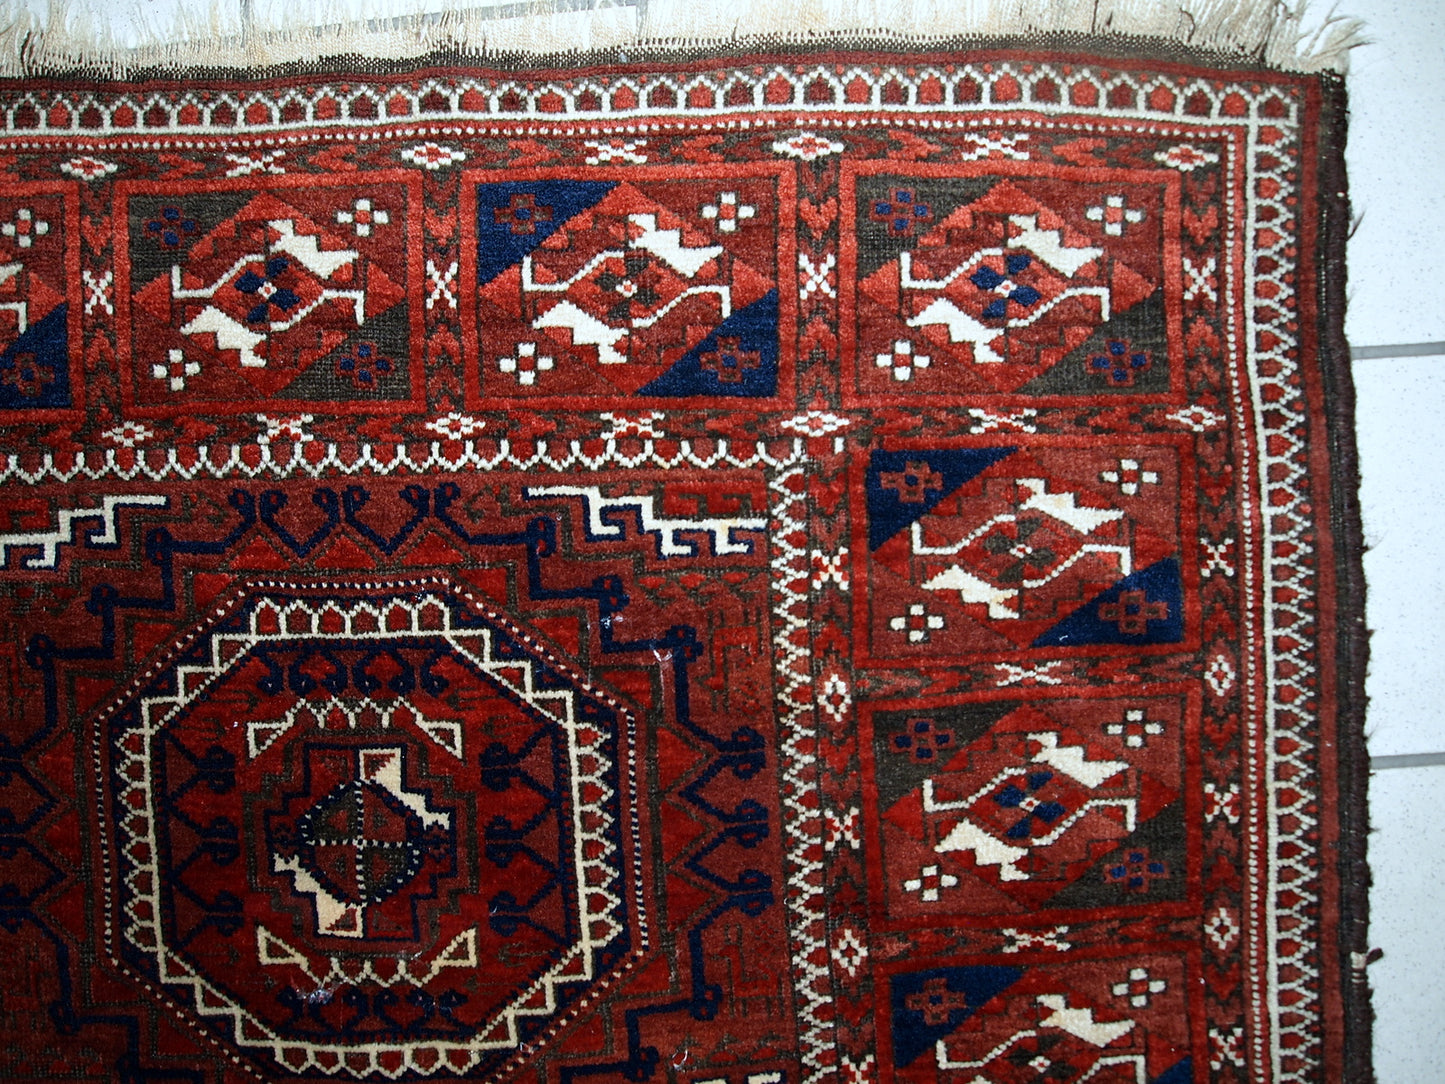 Antique hand made Afghan Baluch rug in original condition, has some age wear. The rug is in traditional deep burgundy shade with navy blue and white accents, has very rich combination of colors. 